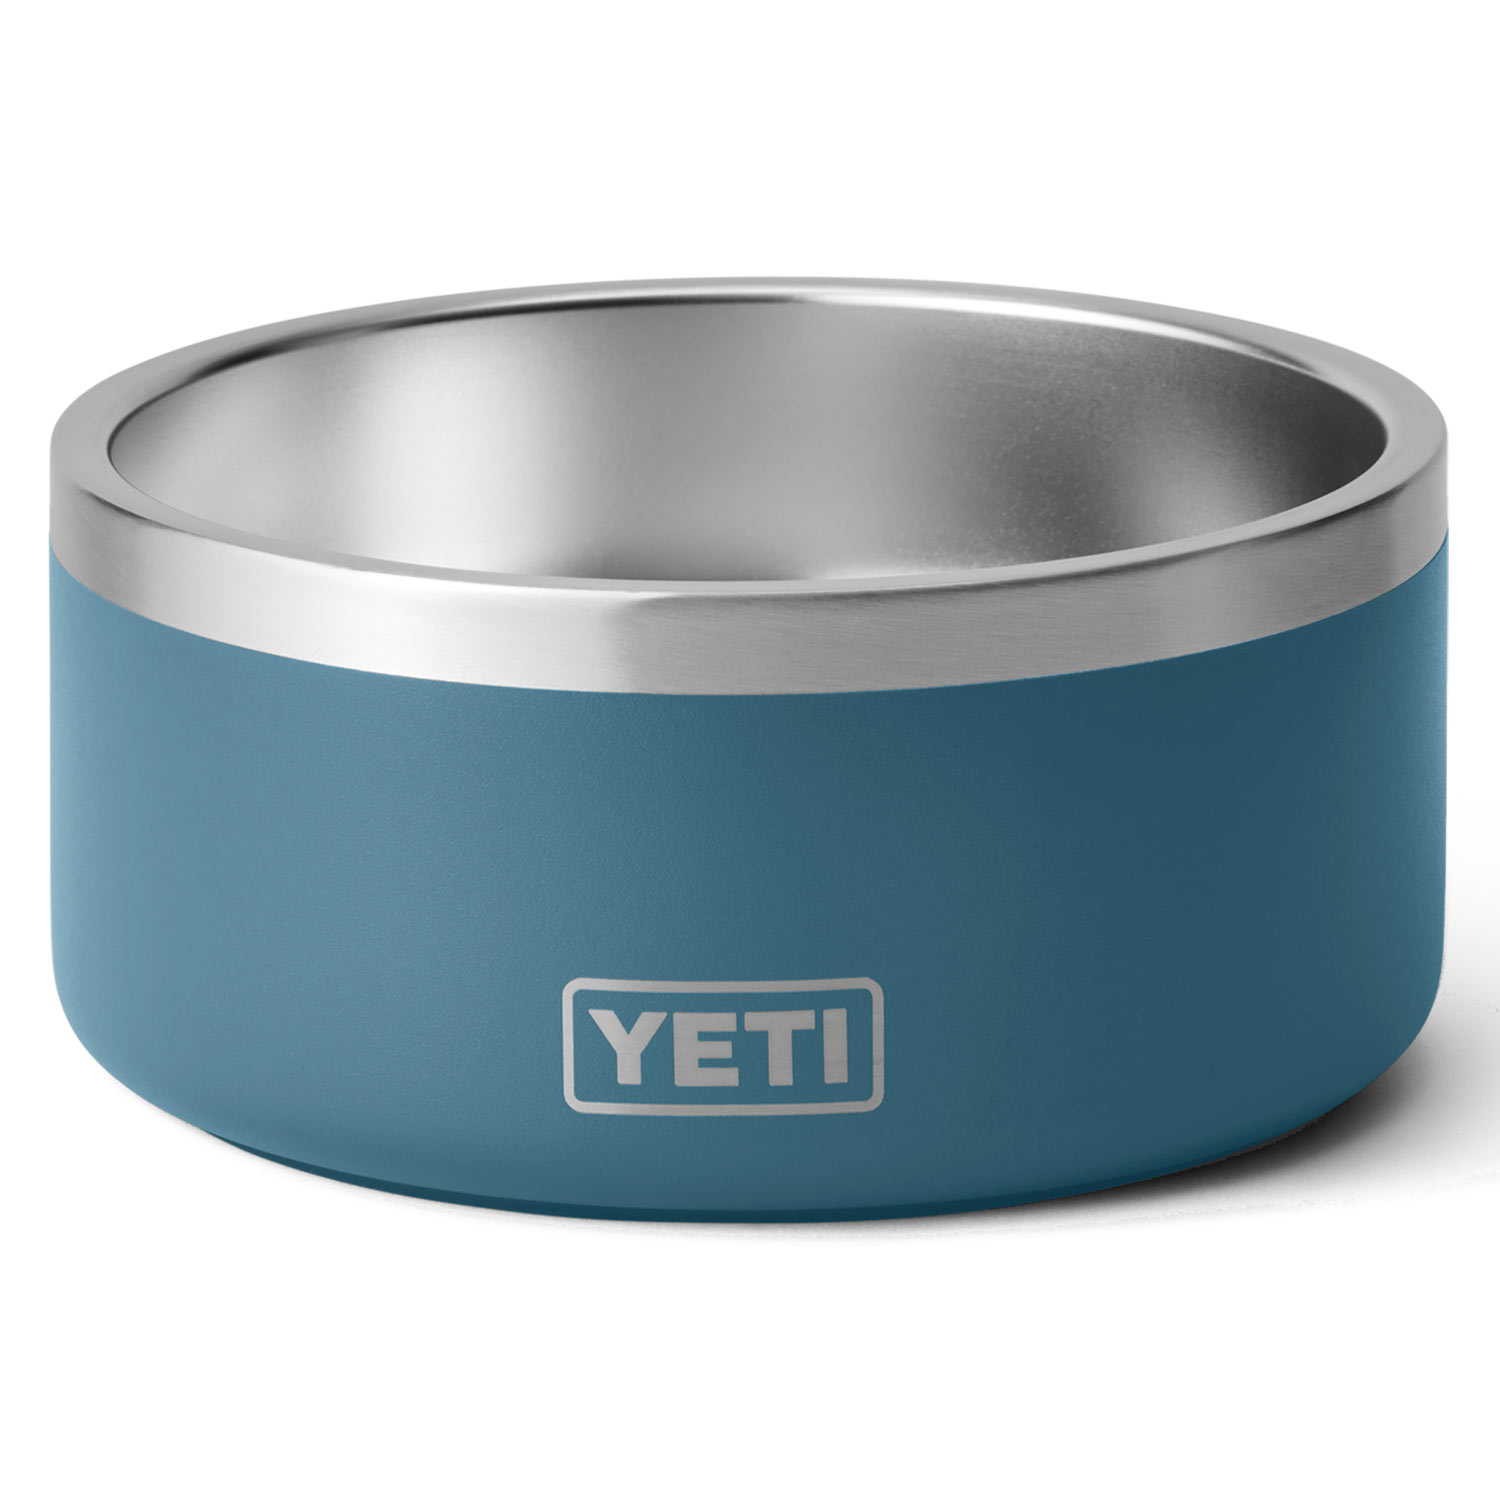 Yeti Boomer 4 Cups Dog Bowl - Stainless Steel - Silver - Brand New in Box